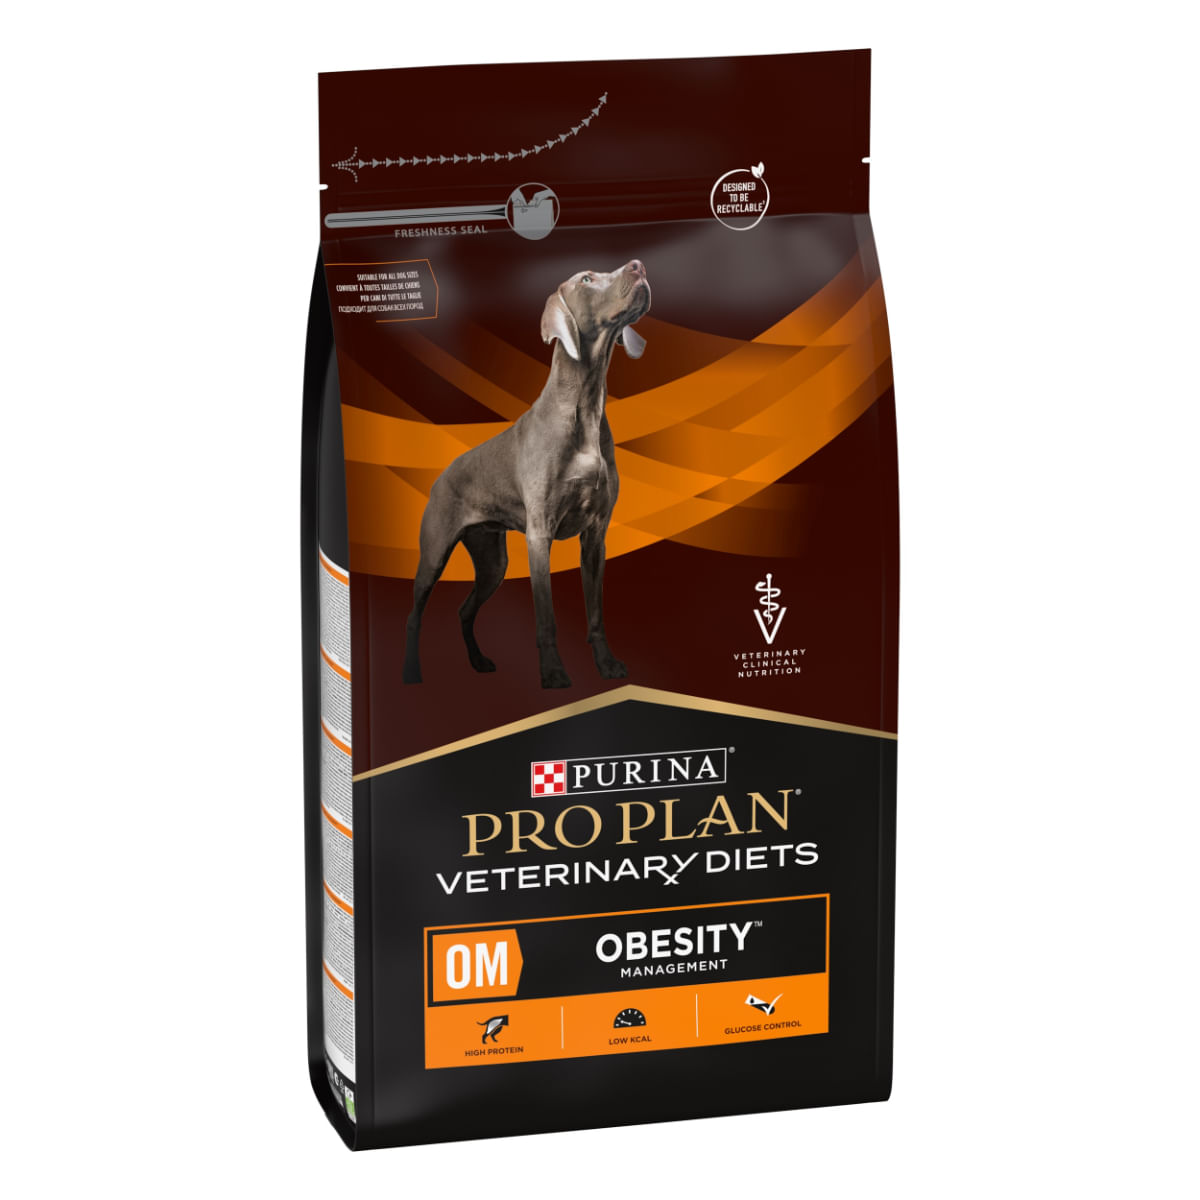 Purina Pro Plan Veterinary Diets  Om Obesity Management Cane 3KG